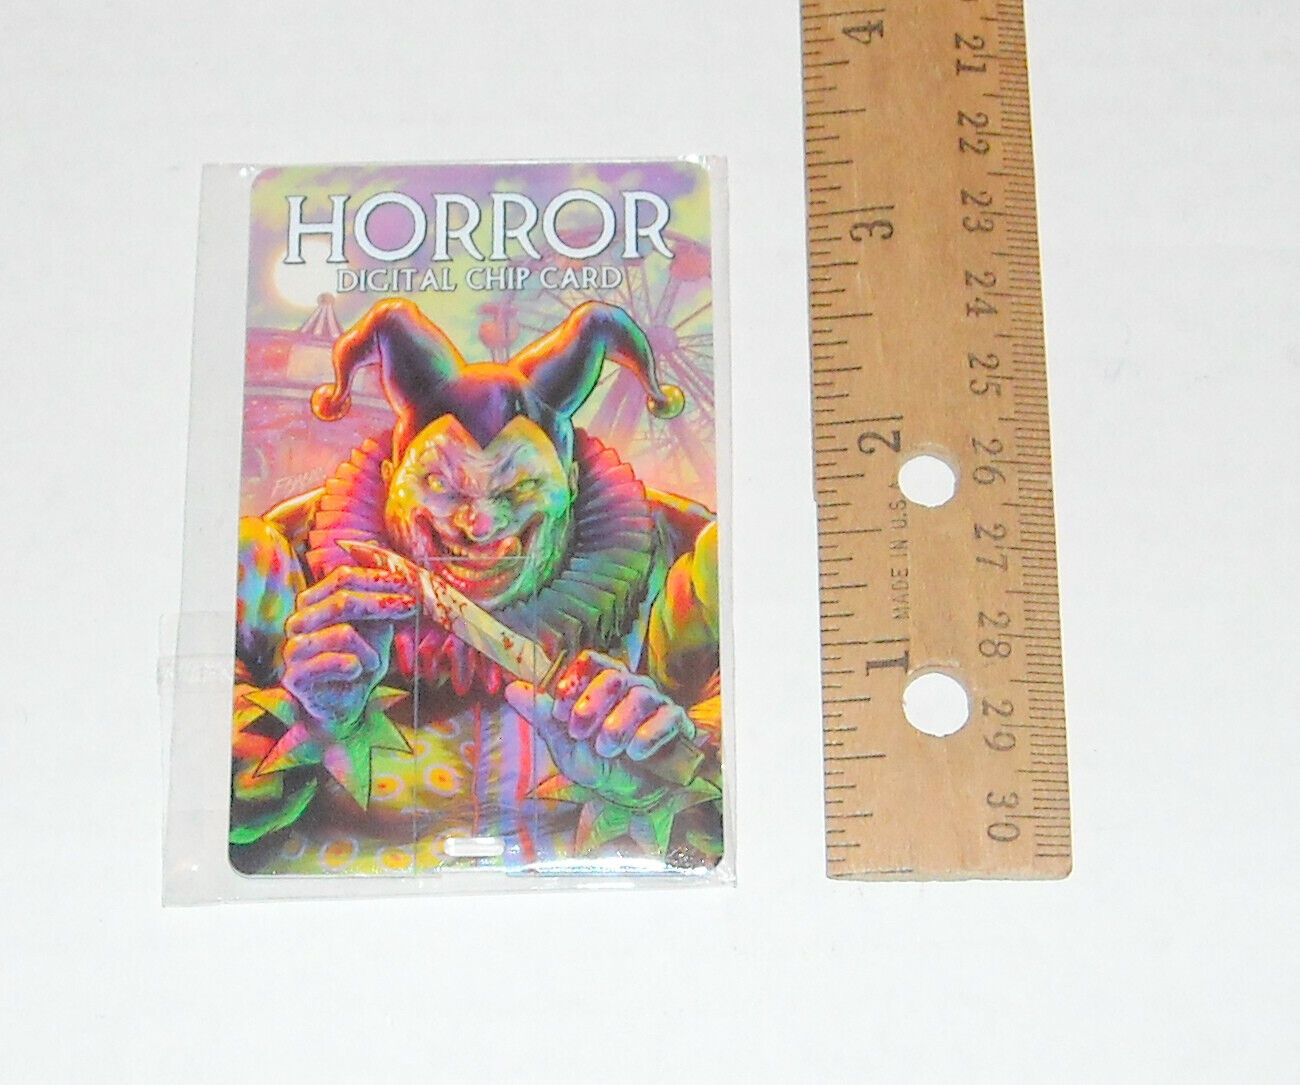 2023 Zenescope USB HORROR DIGITAL CHIP CARD Contains 12 issues + Wallpapers